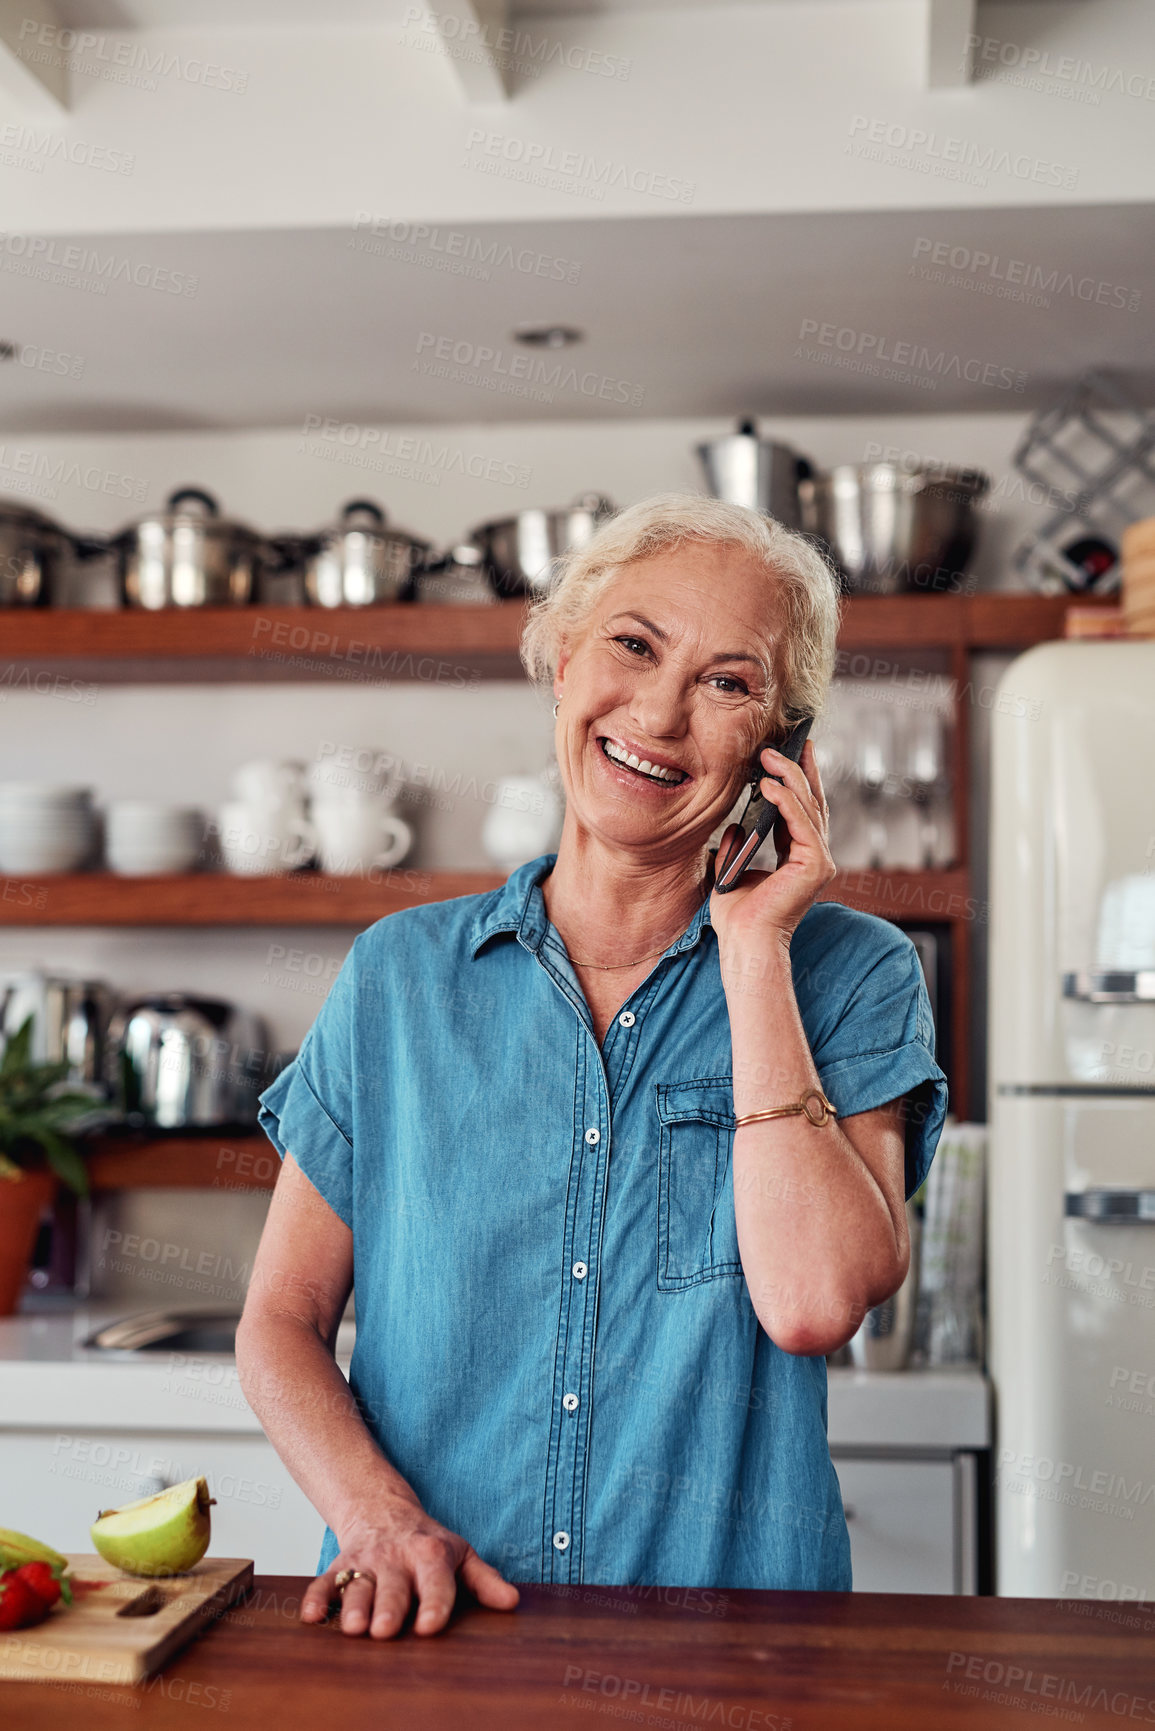 Buy stock photo Cropped portrait of an attractive senior woman making a phonecall while preparing breakfast in the kitchen at home